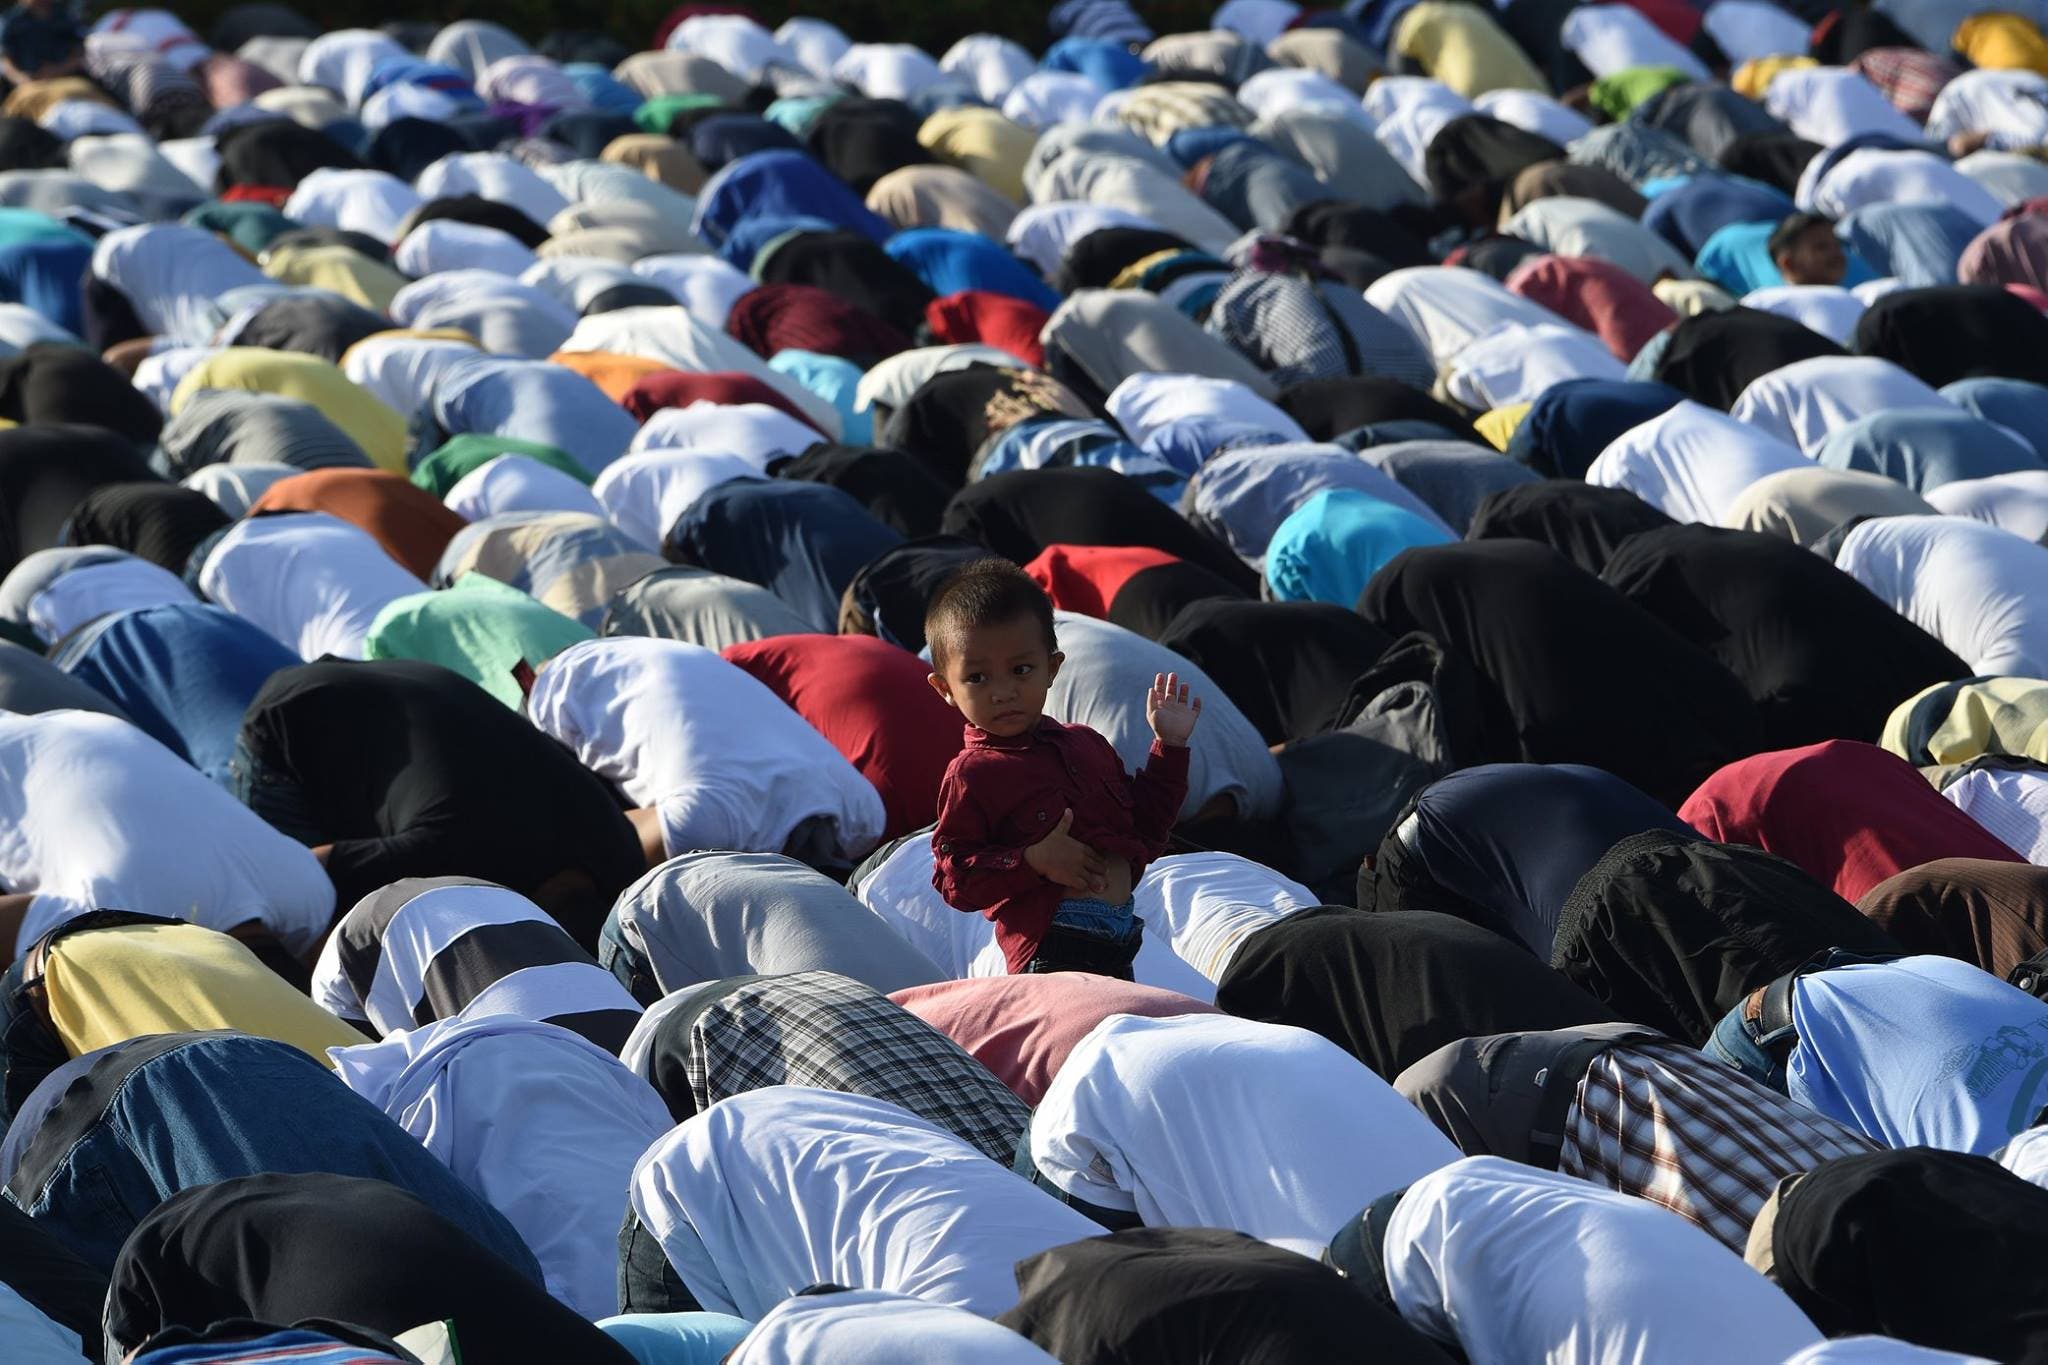 A boy looks on as Filipino Muslims attend Eid al-Adha prayers at a park in Manila on September 1, 2017. (AFP)